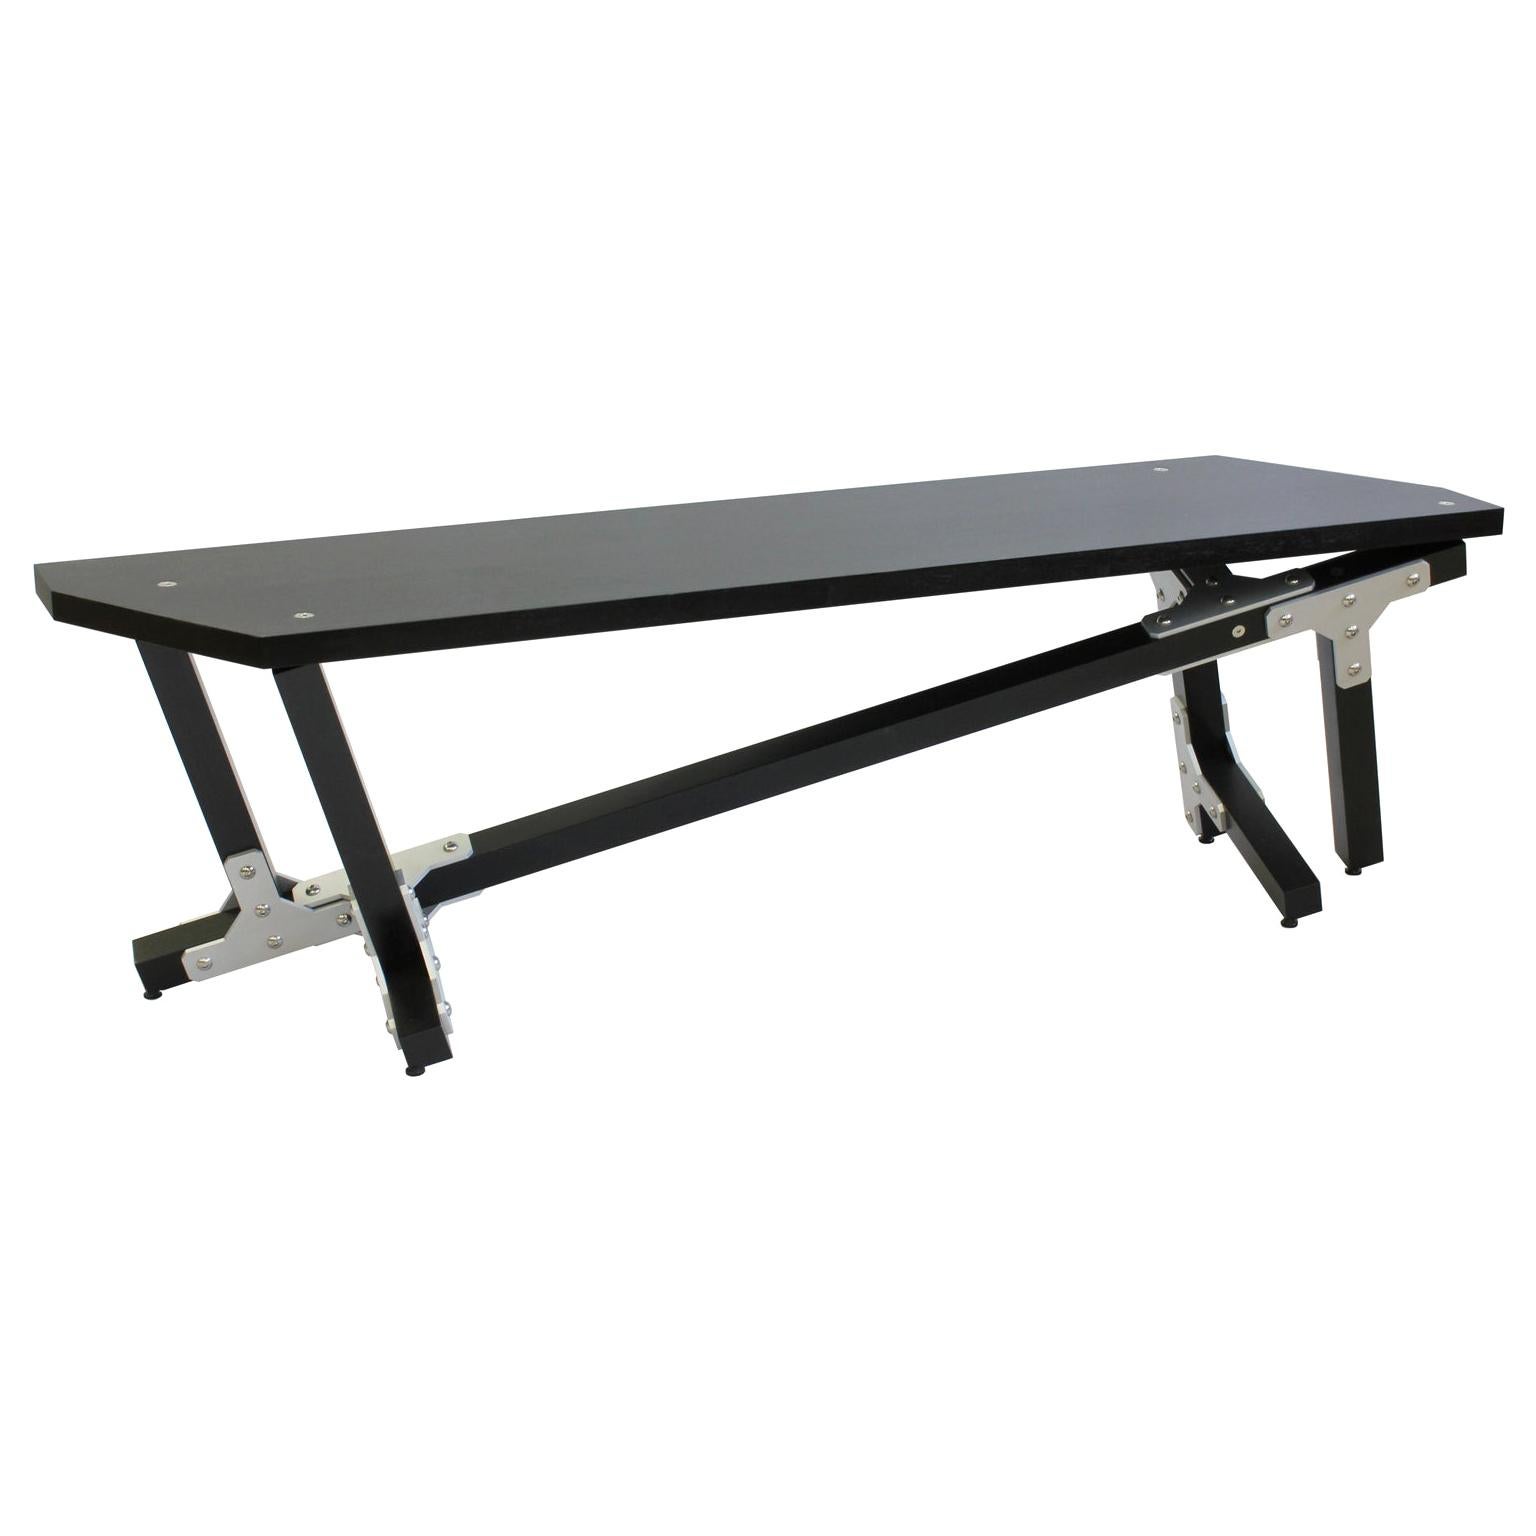 Modern Industrial Black Mahogany Wood Bench with Metal Brackets